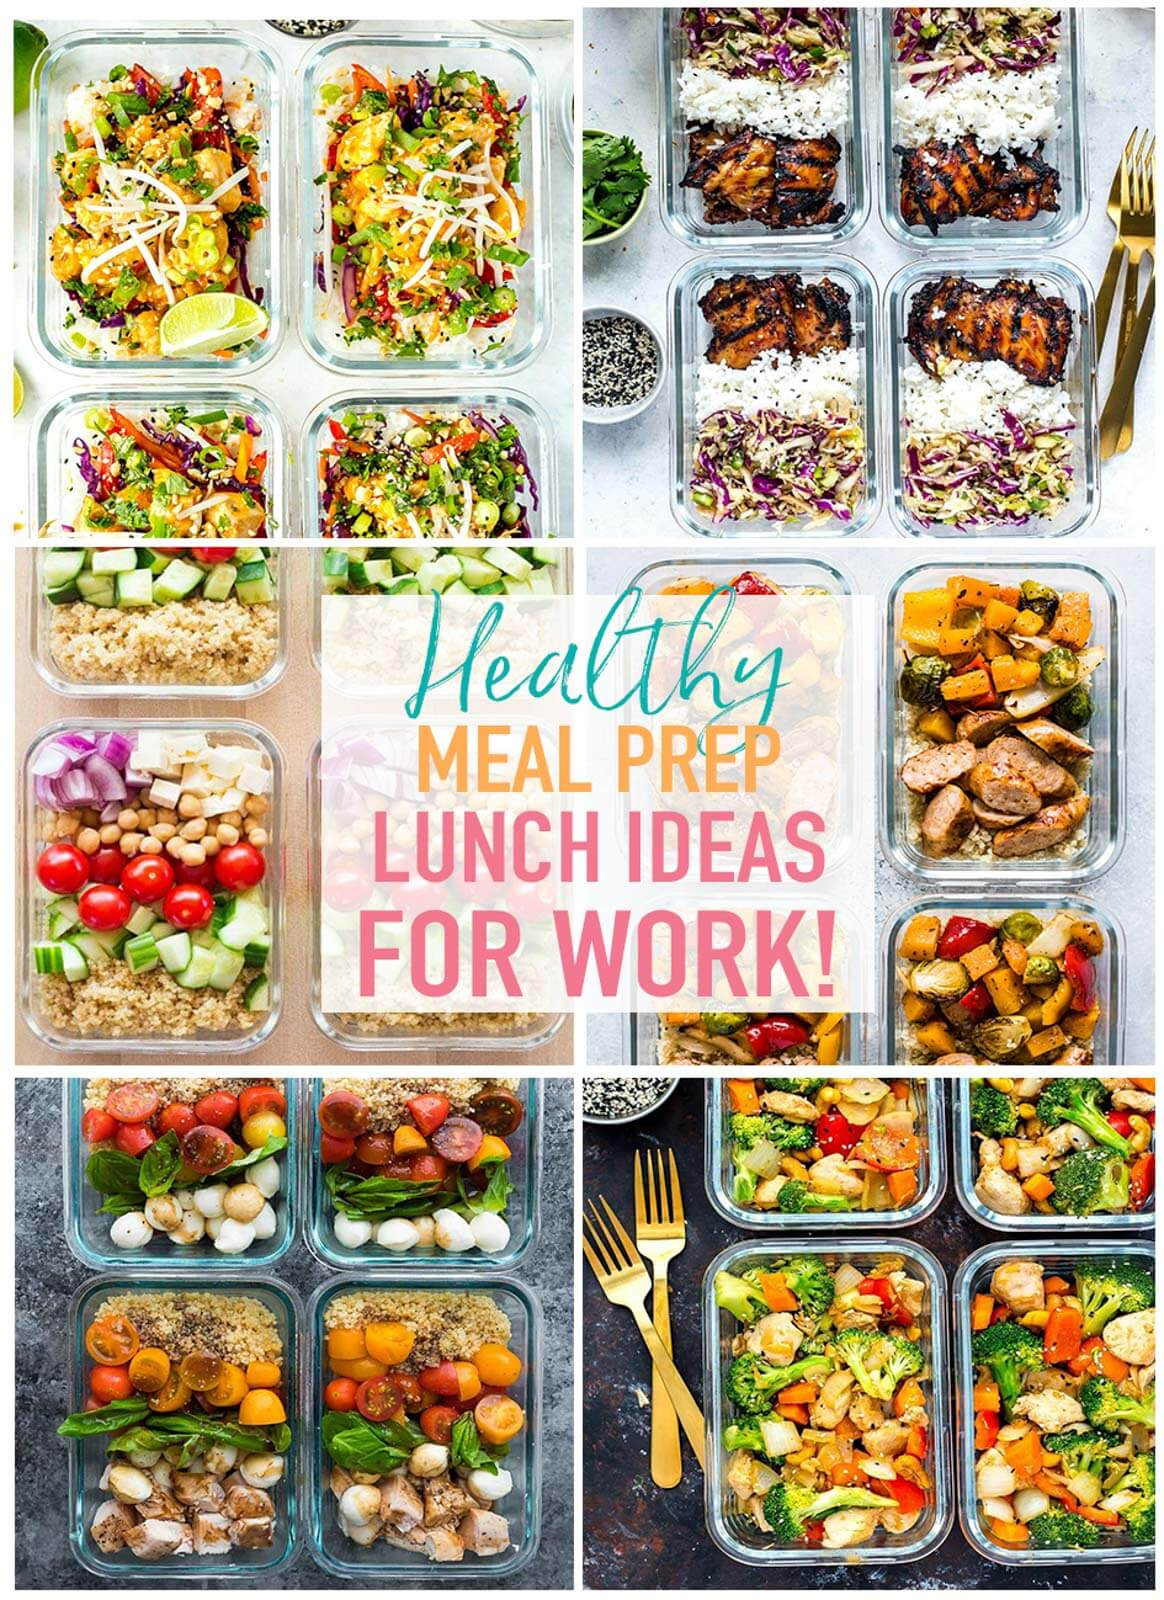 Easy And Healthy Lunches
 20 Easy Healthy Meal Prep Lunch Ideas for Work The Girl